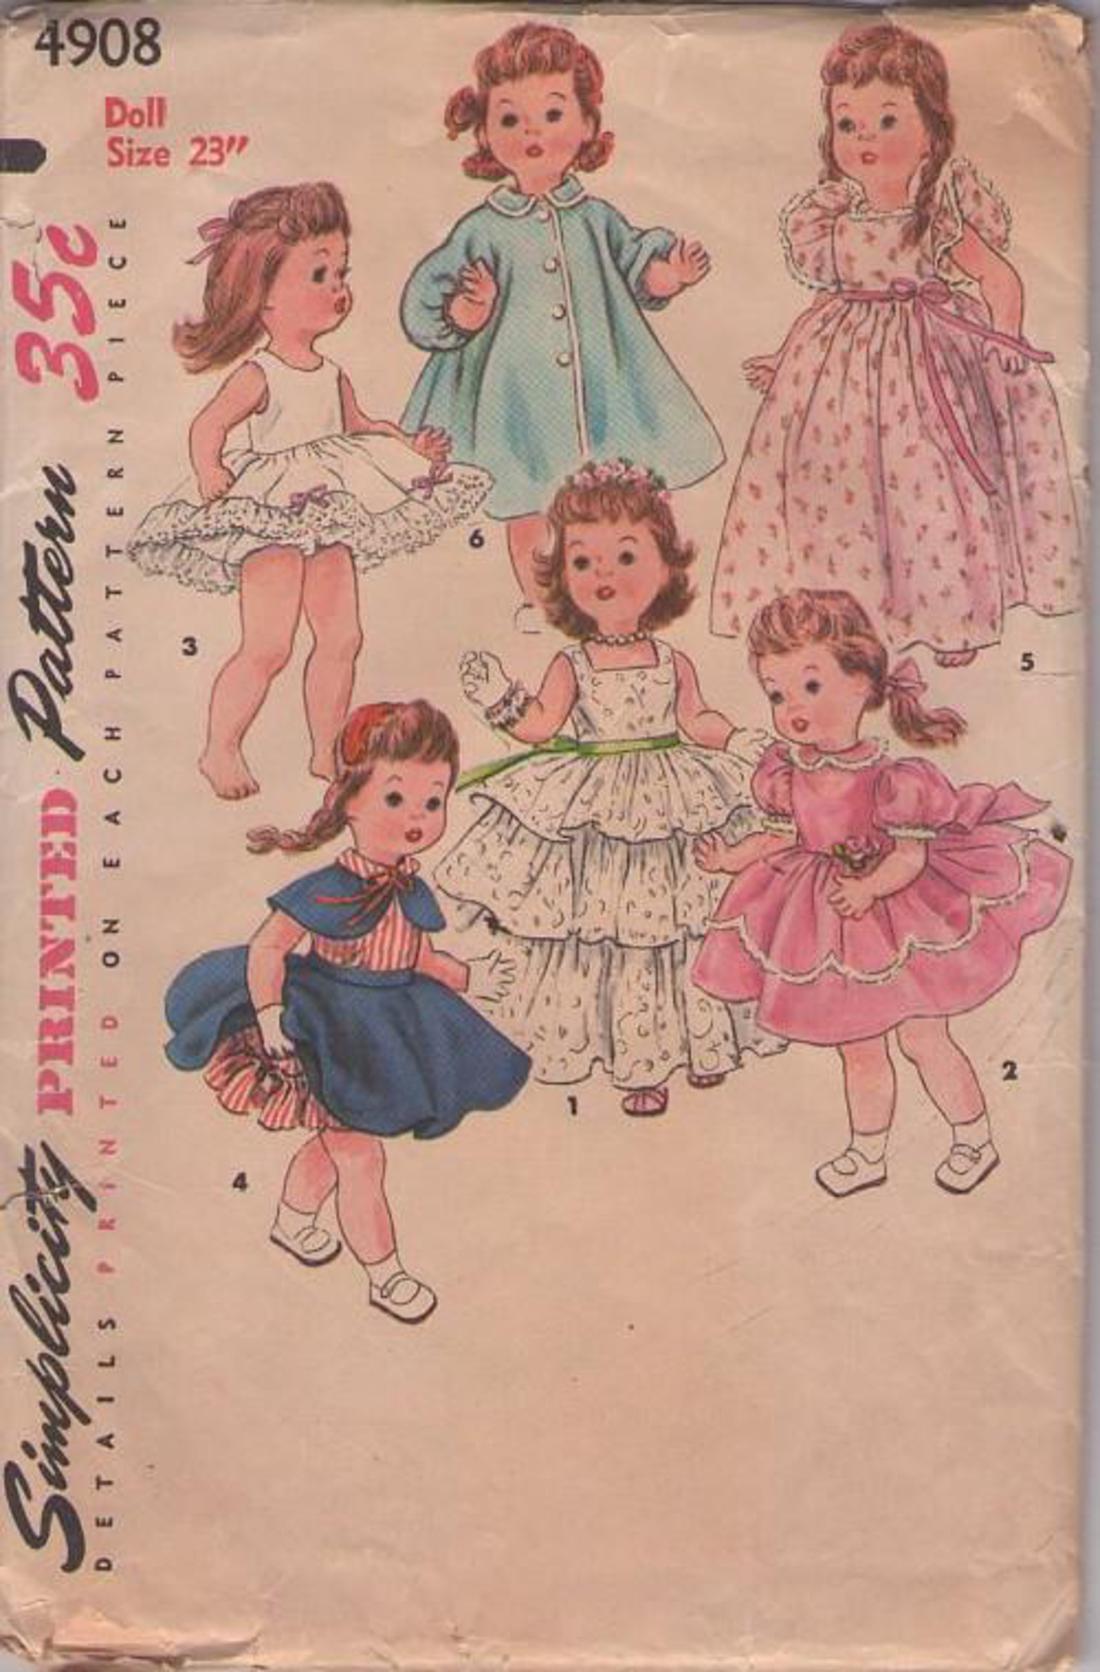 Doll Clothing PATTERN 4908 for 23 in Bonny Braids n Saucy Walker by Ideal 